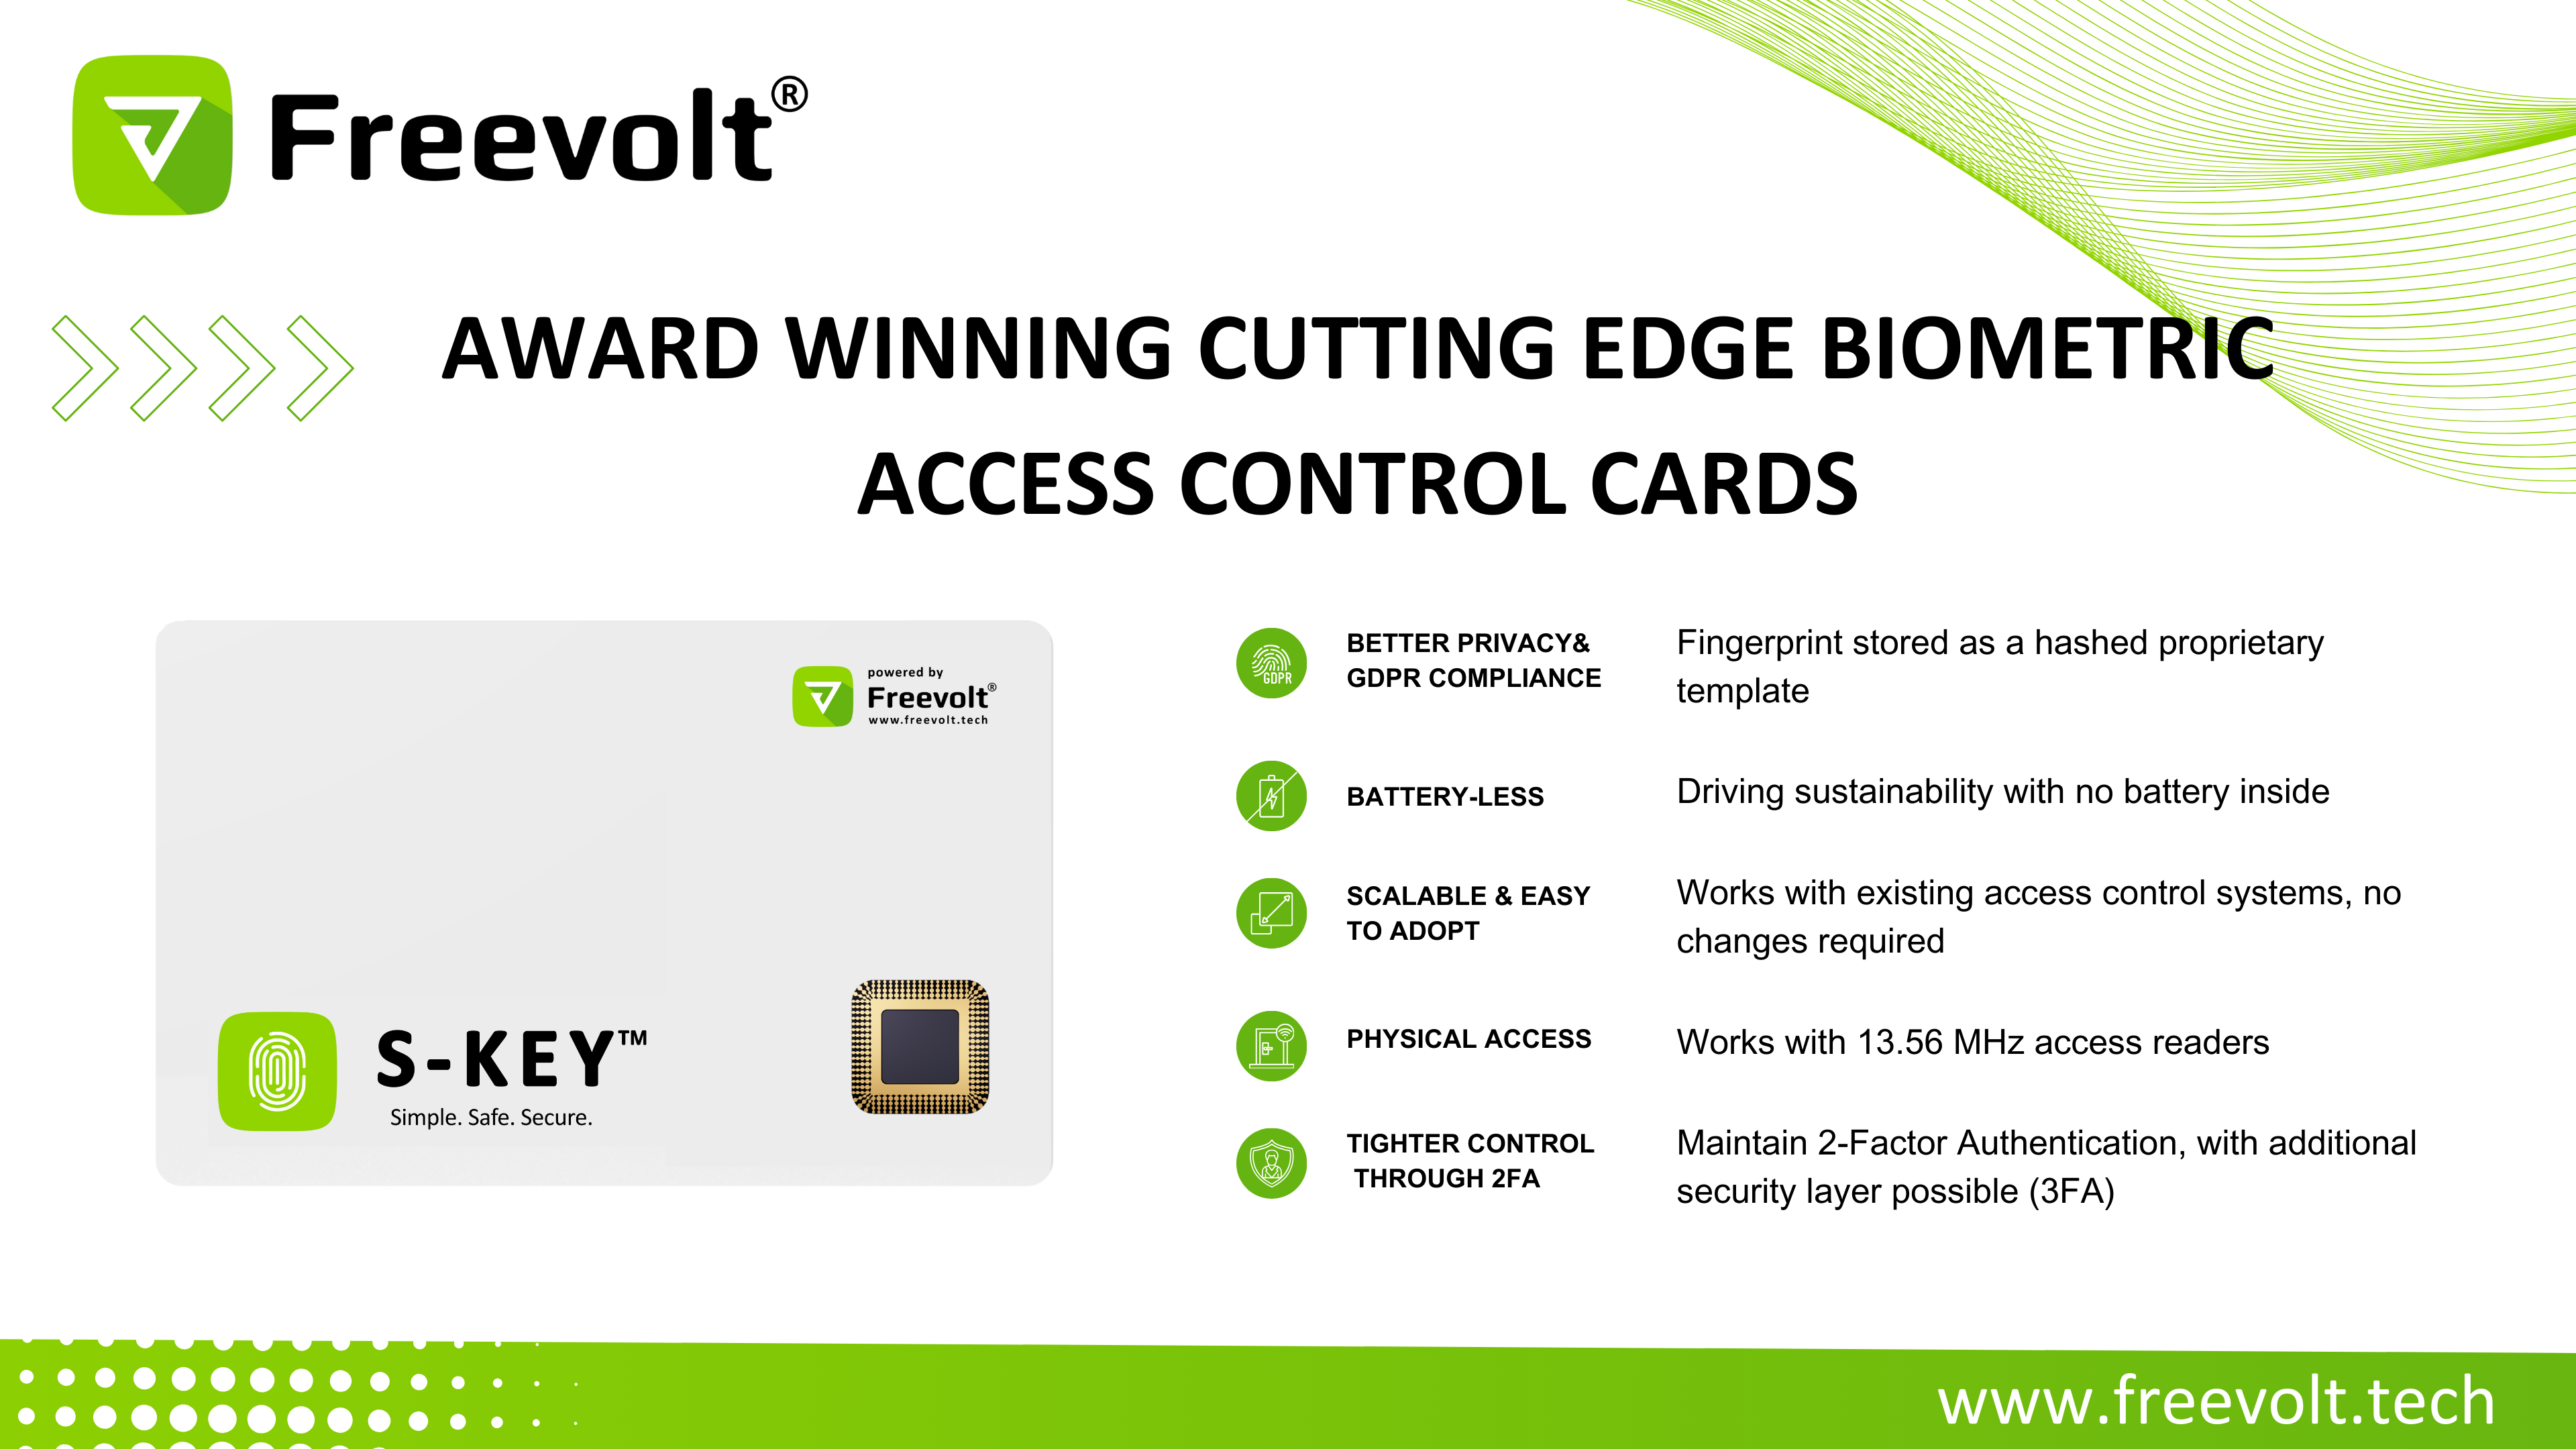 Advanced Access Control Solutions from Freevolt Technology